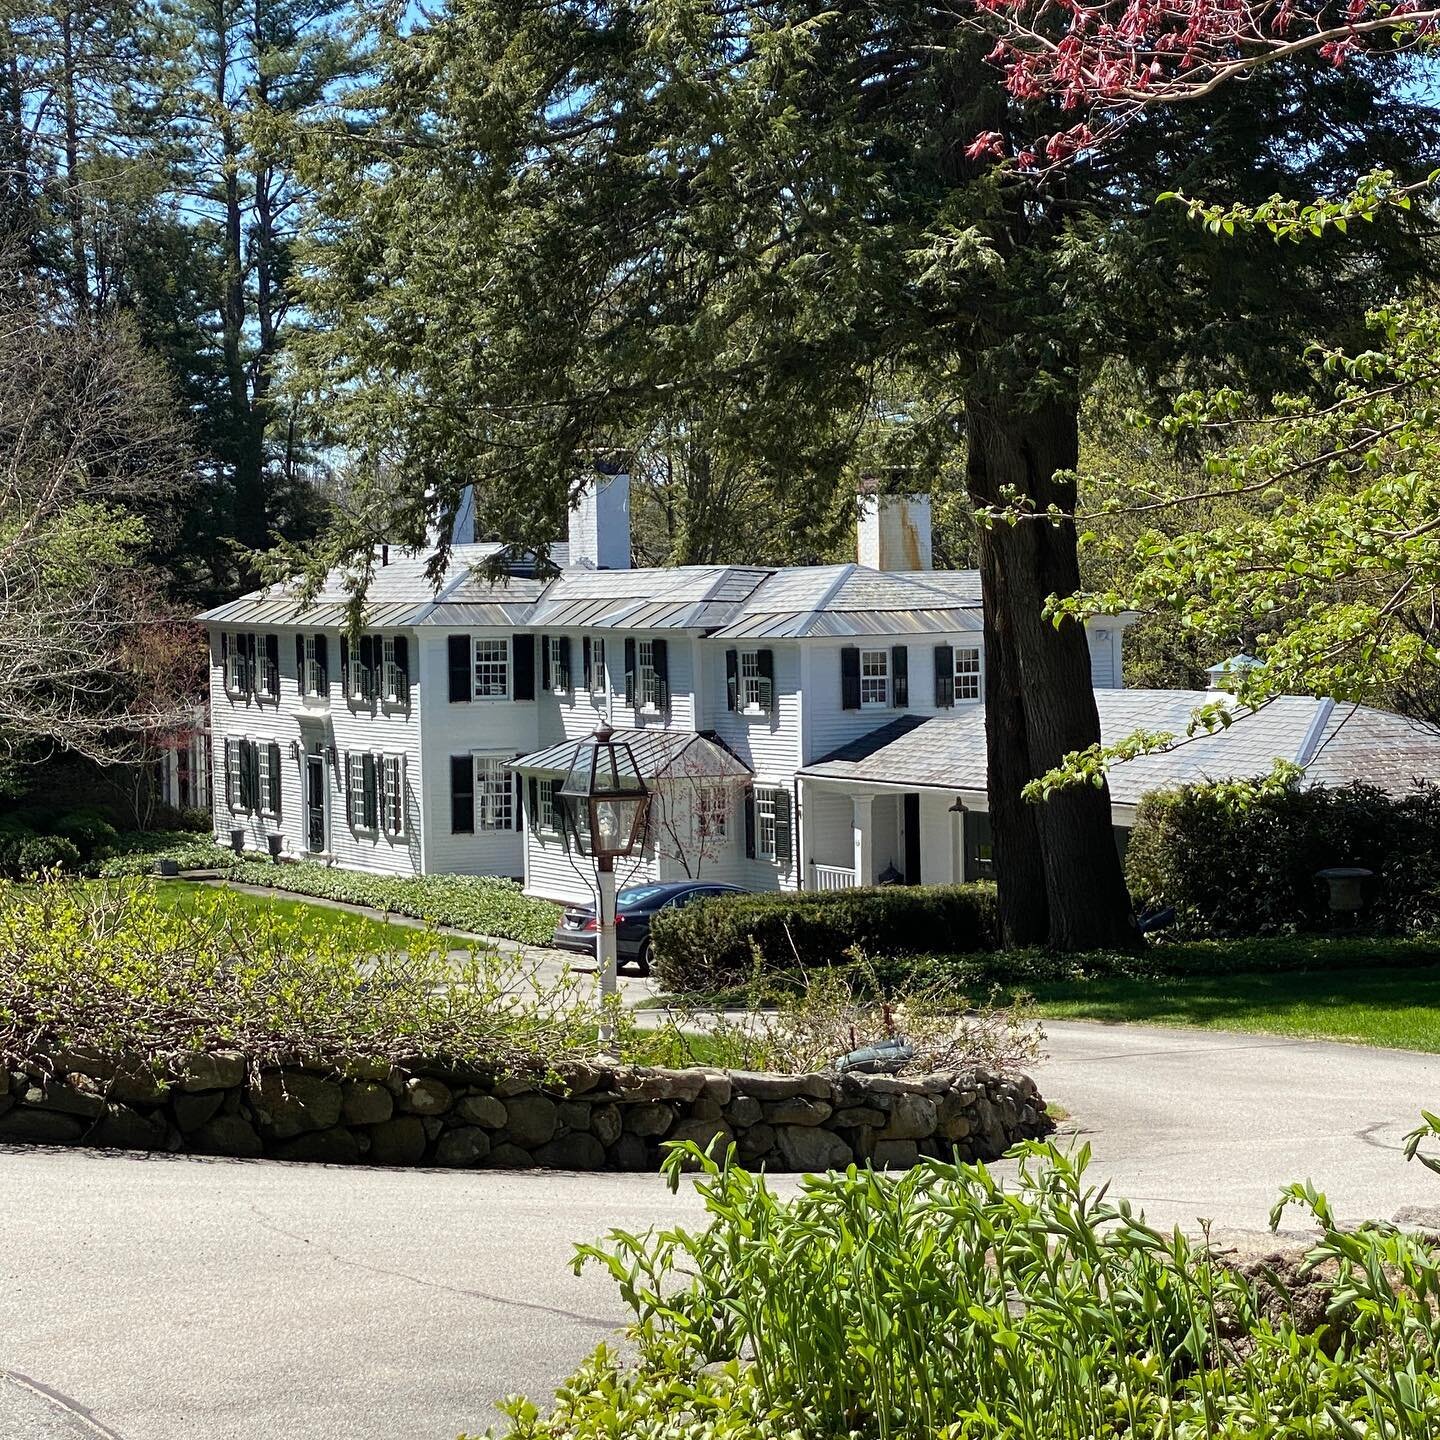 Ask me if I turned my car around to look at this home and take in its architecture.  Nahhhh&hellip; no need to ask; we all know I did! 🤣. #monadnockregion #eleganthome #eleganthomes #newenglandfineliving #oldhouselove #countryestate